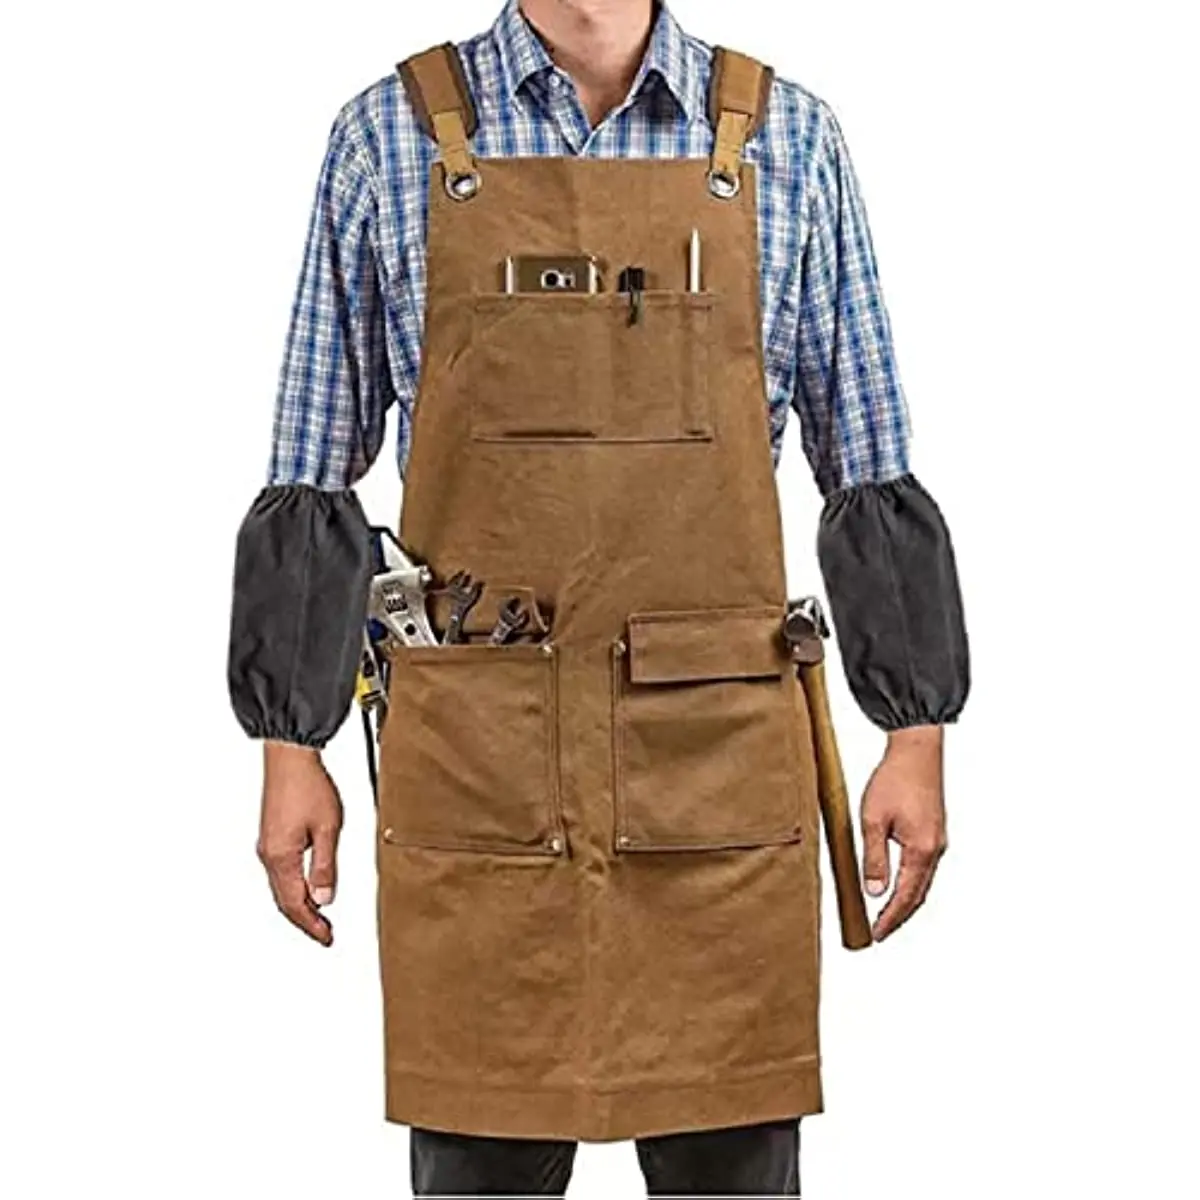 

Thickened Canvas Apron Waterproof Cleaning Woodworking Mechanic Carpenter Electrician Gardening Heavy Industry Sleeve Apron Set